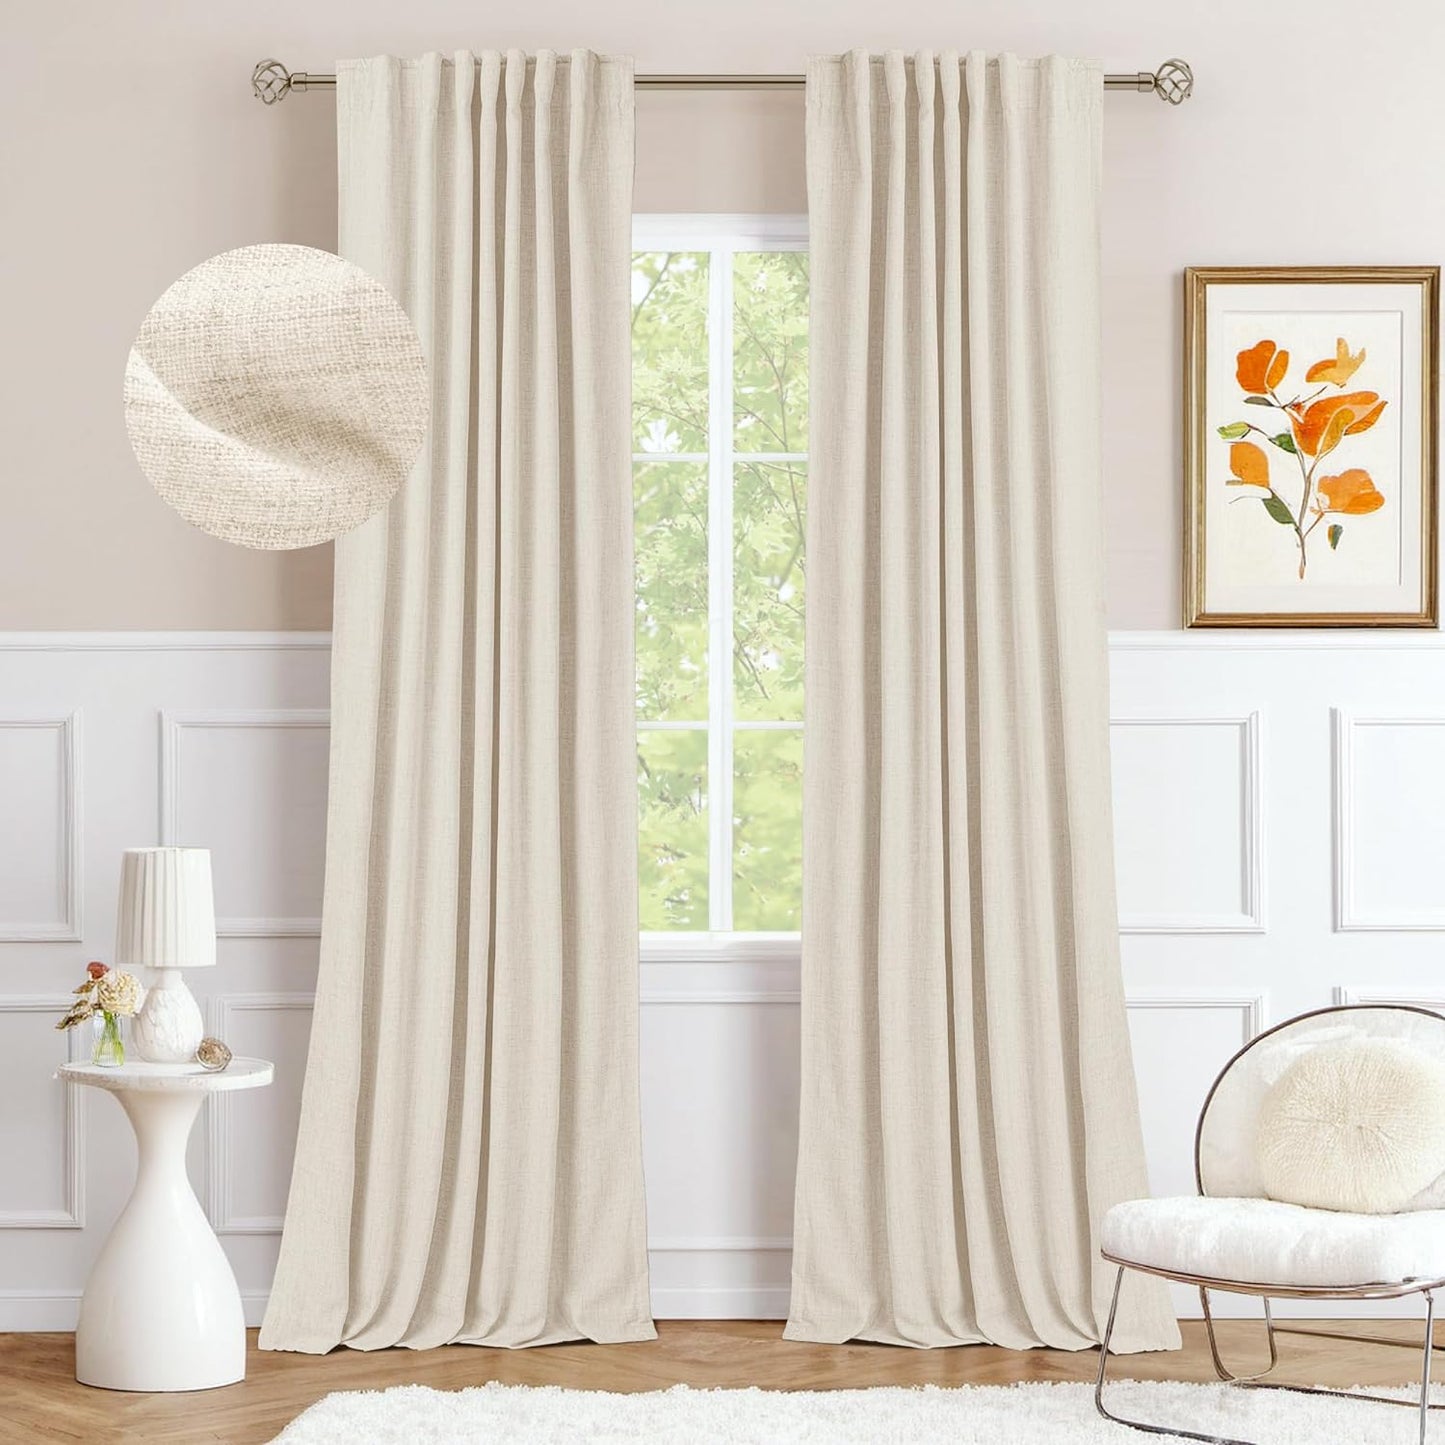 INOVADAY 100% Blackout Curtains 96 Inches Long 2 Panels Set, Thermal Insulated Linen Blackout Curtains for Bedroom, Back Tab/Rod Pocket Curtains & Drapes for Living Room - Beige, W50 X L96  INOVADAY 01 Cream 50''W X 90''L 